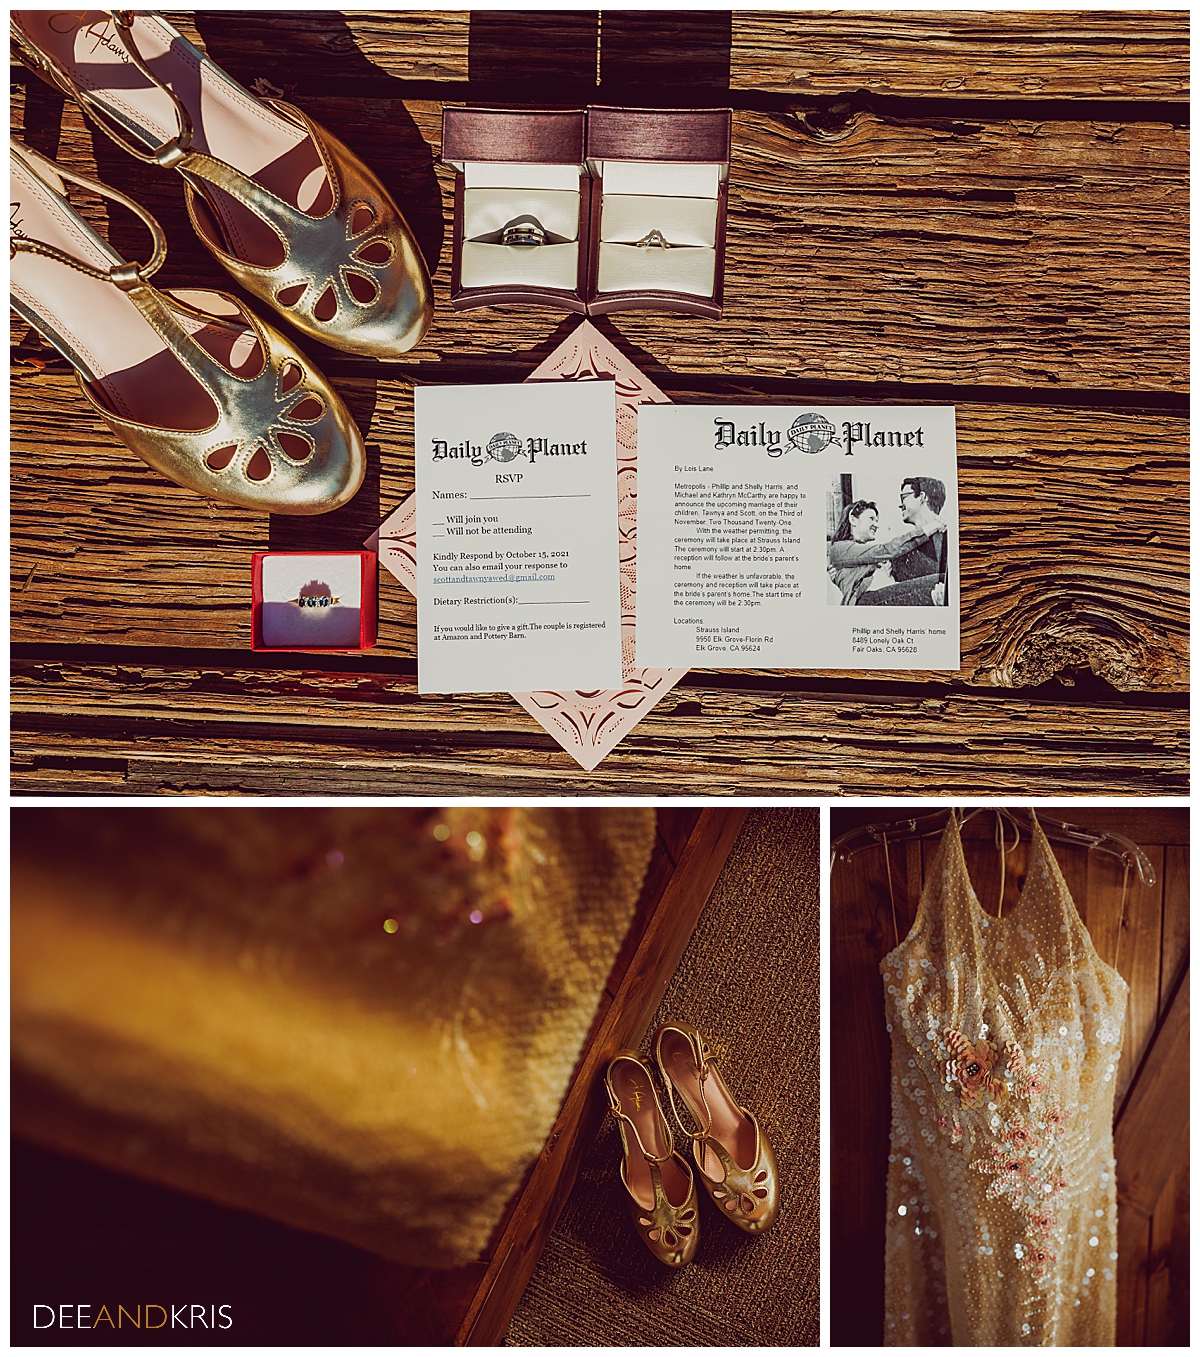 Three color images: Top image of lay flat with rings, shoes, and invitations. Bottom left POV image of shoes under wedding dress. Bottom right image of wedding dress details.